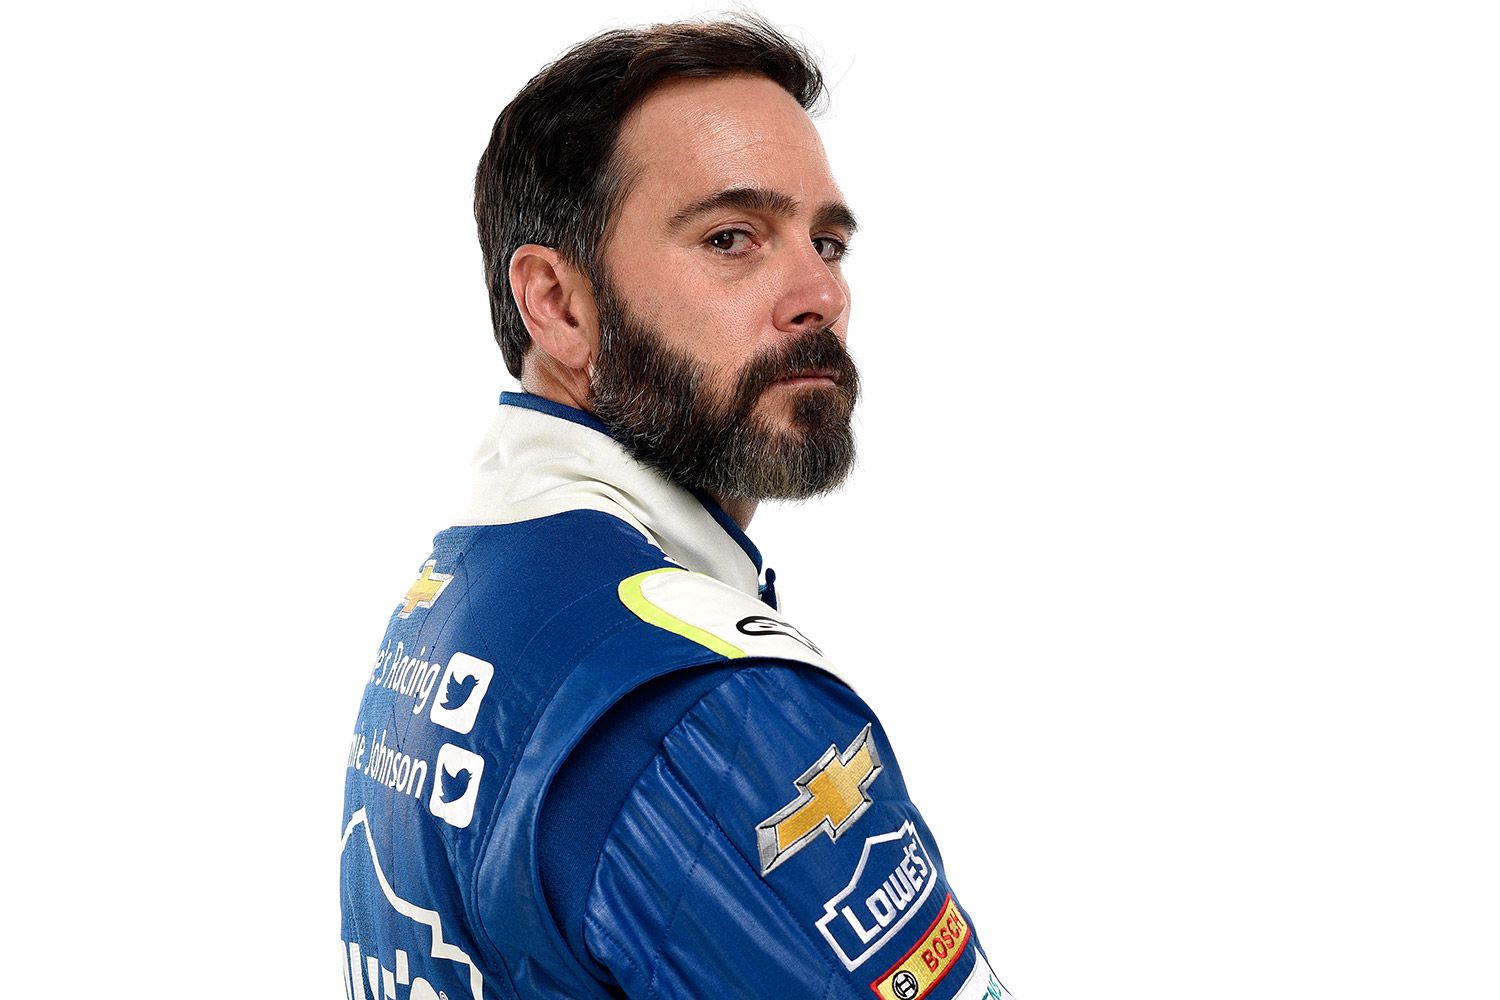 Jimmie Johnson Net Worth - From Racing Success To Financial Triumph